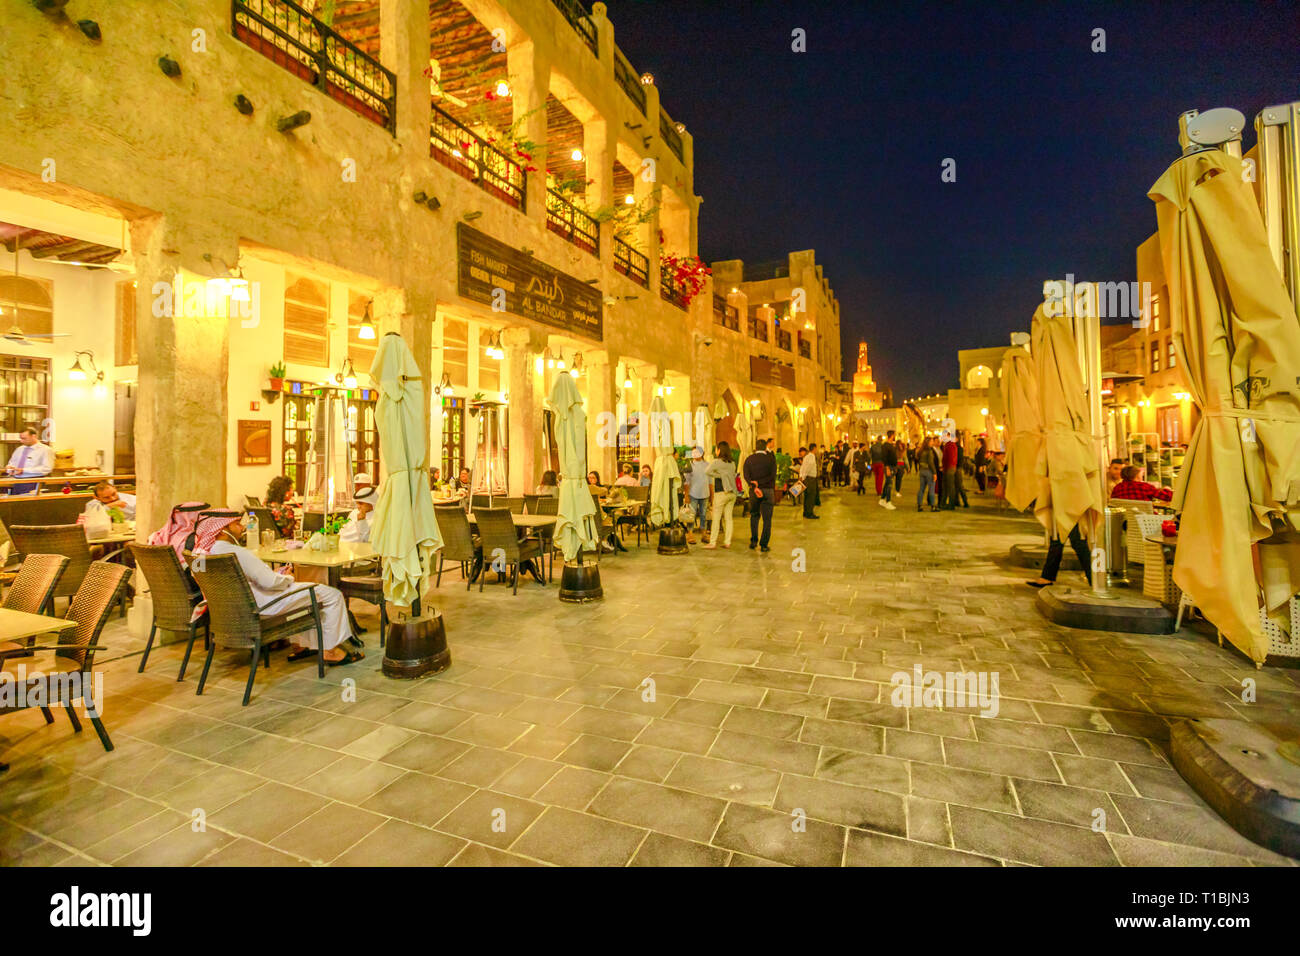 Doha, Qatar - February 17, 2019: Street view in Souq Waqif market with cafes and restaurants and the Fanar Islamic Cultural Center with Spiral Mosque Stock Photo